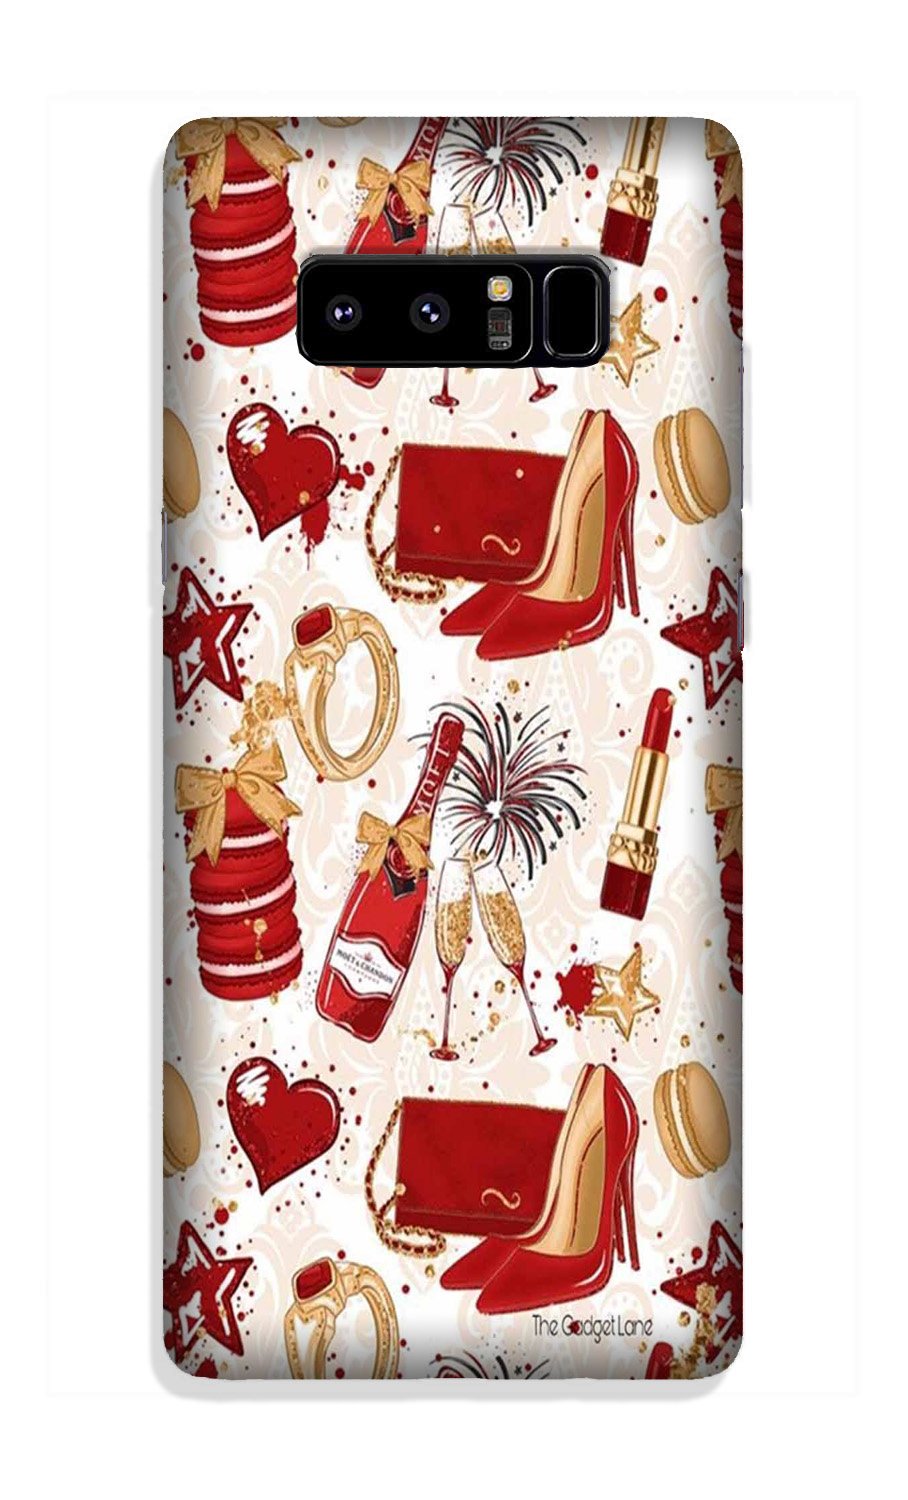 Girlish Mobile Back Case for Galaxy Note 8 (Design - 312)